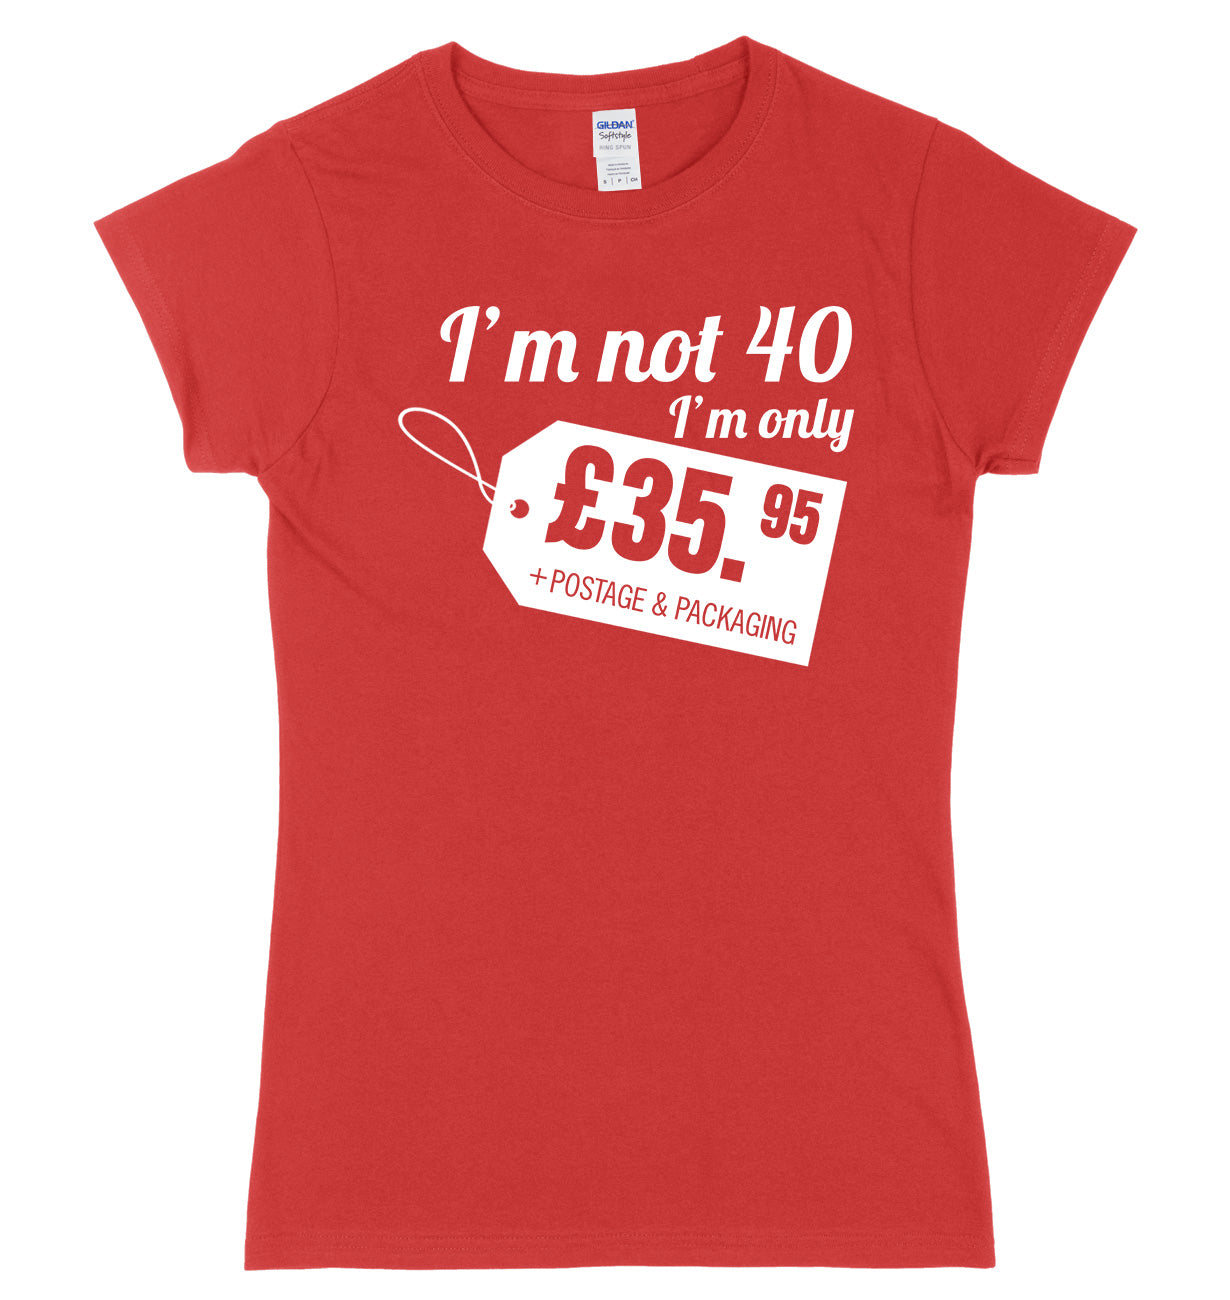 I'm Not 40 I'm Only �35.95 + Postage & Packaging Womens Slim Fit T-Shirt